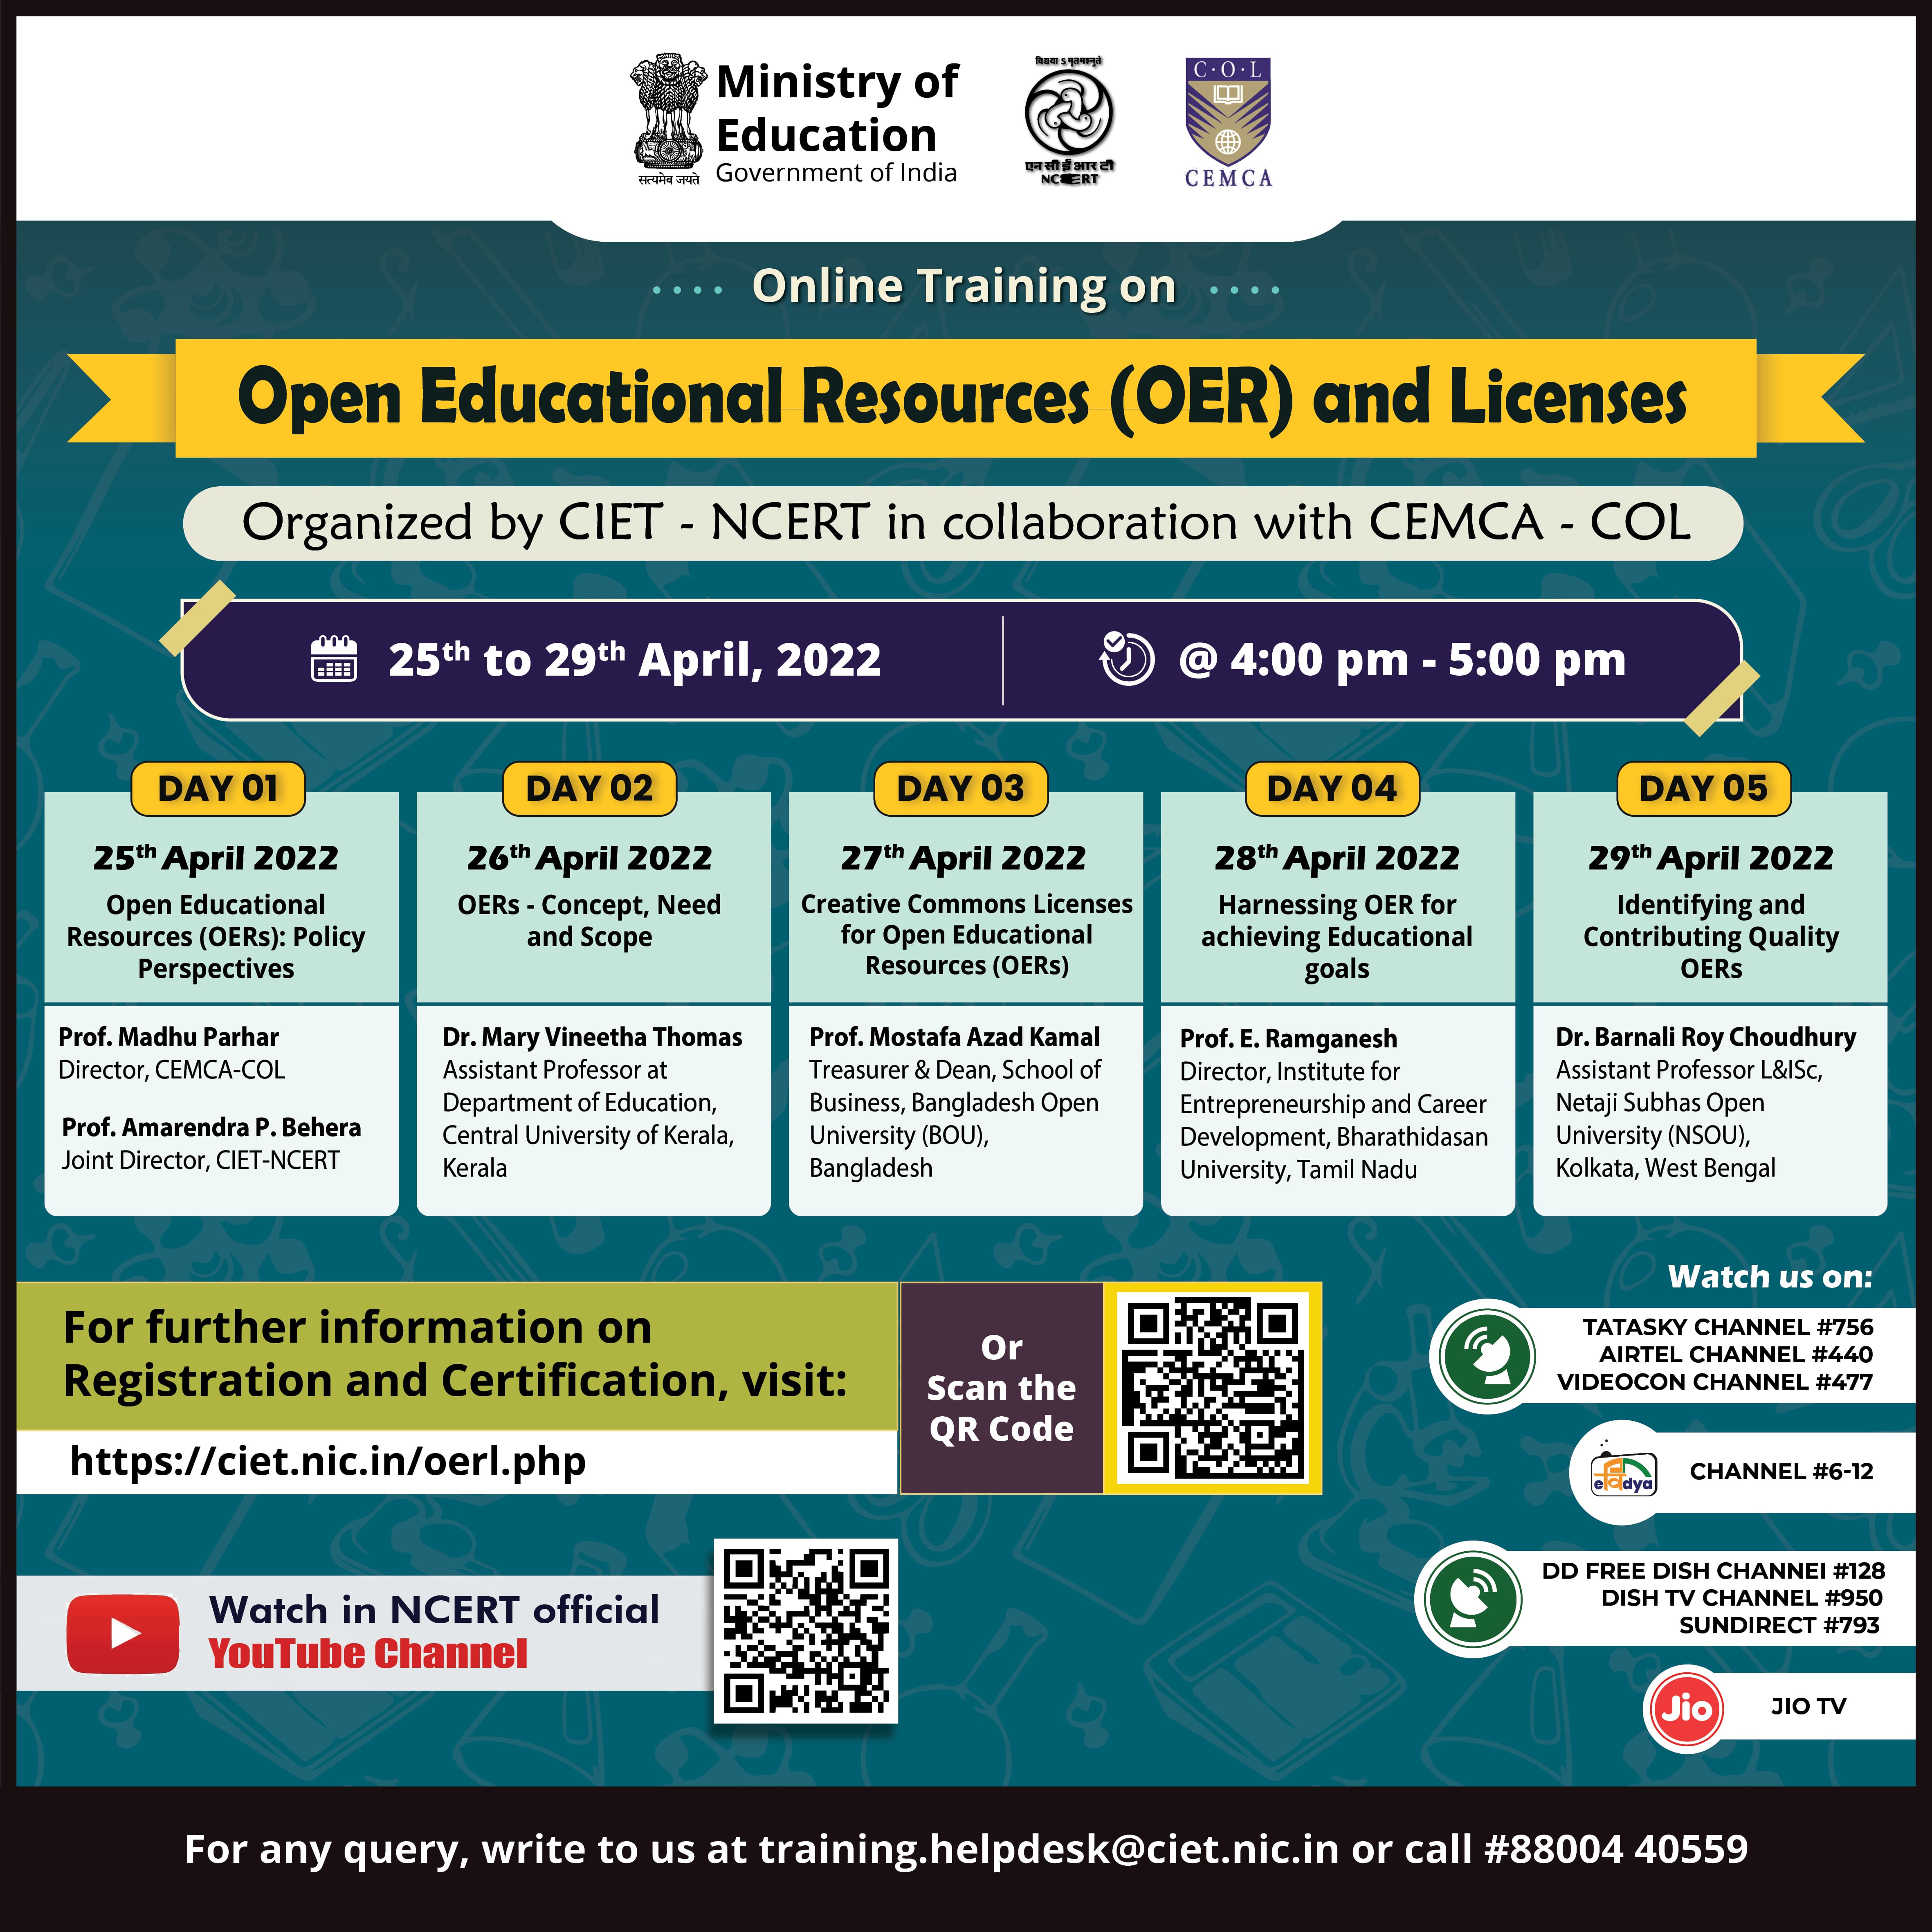 Online Training on “Open Educational Resources (OER) and Licenses” Image